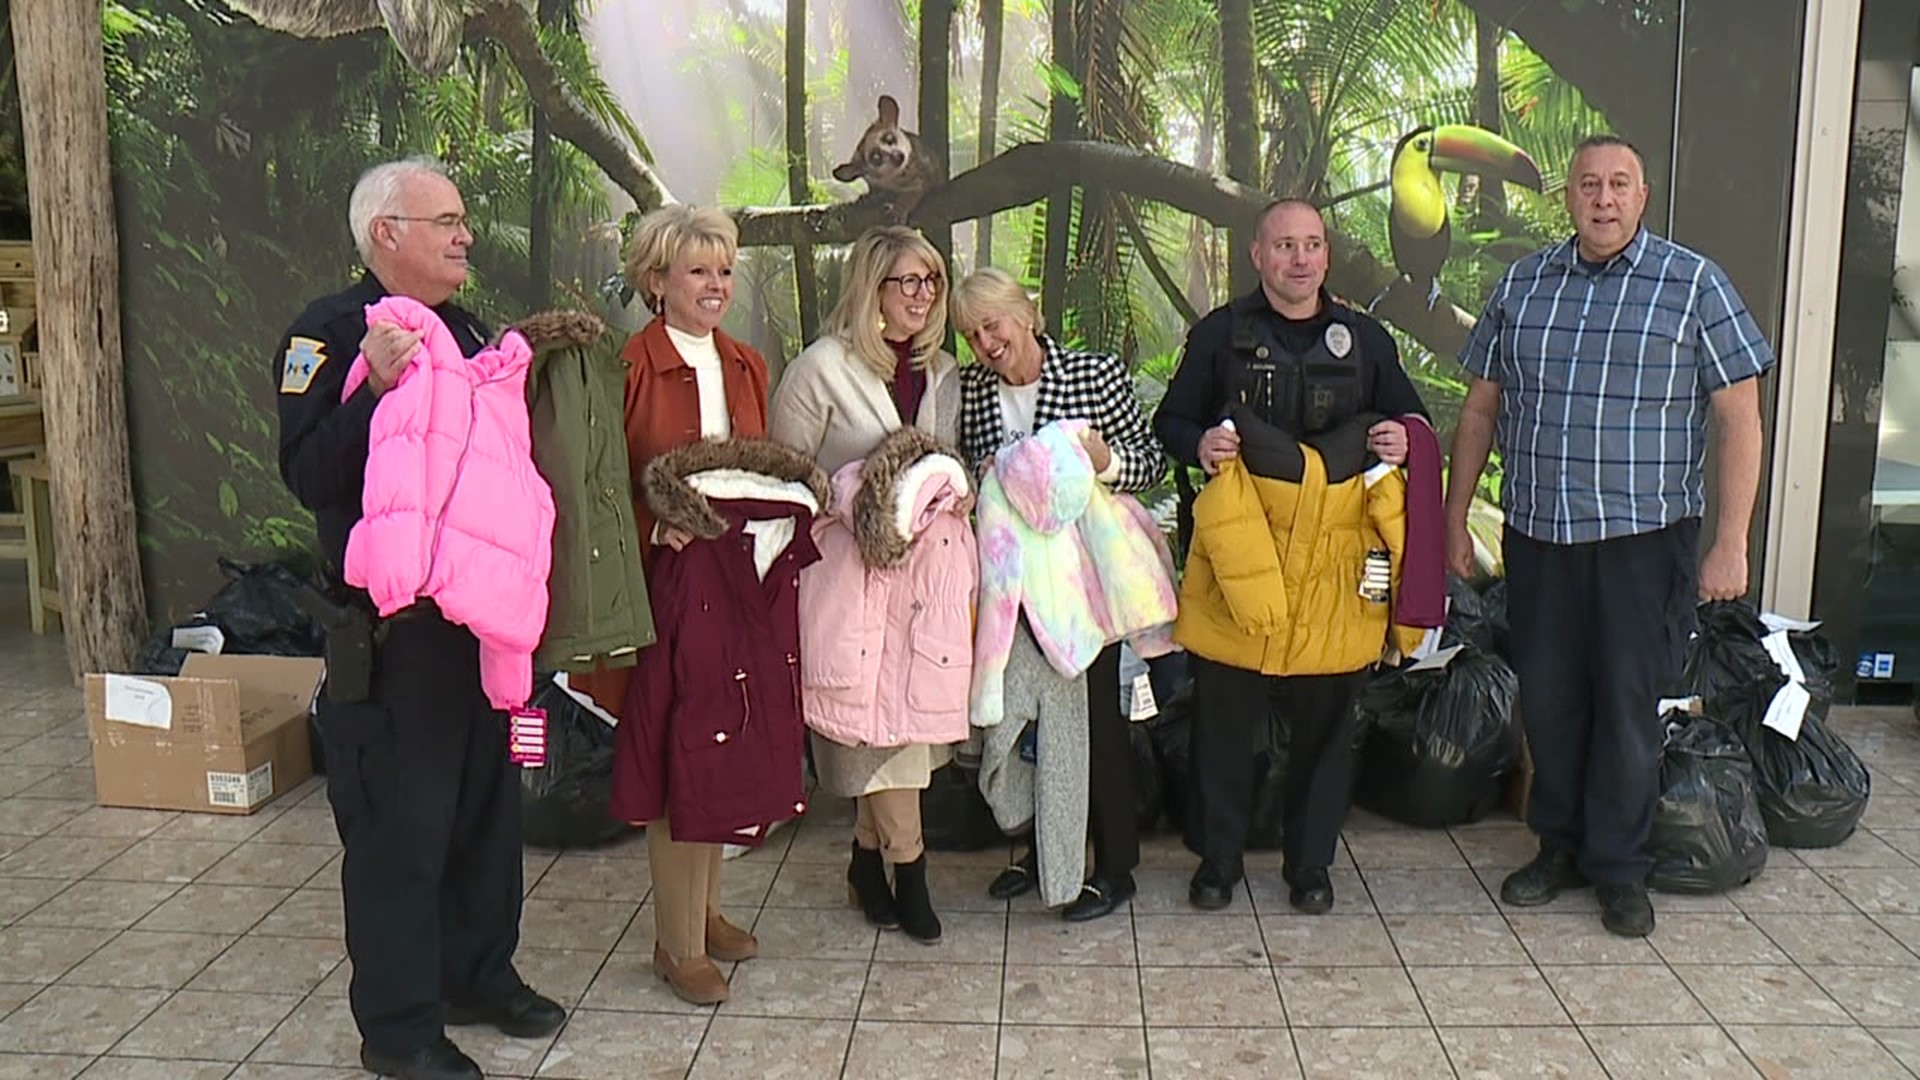 The Scranton Police Department has been collecting items and donations for students in the city school district for about 10 years.